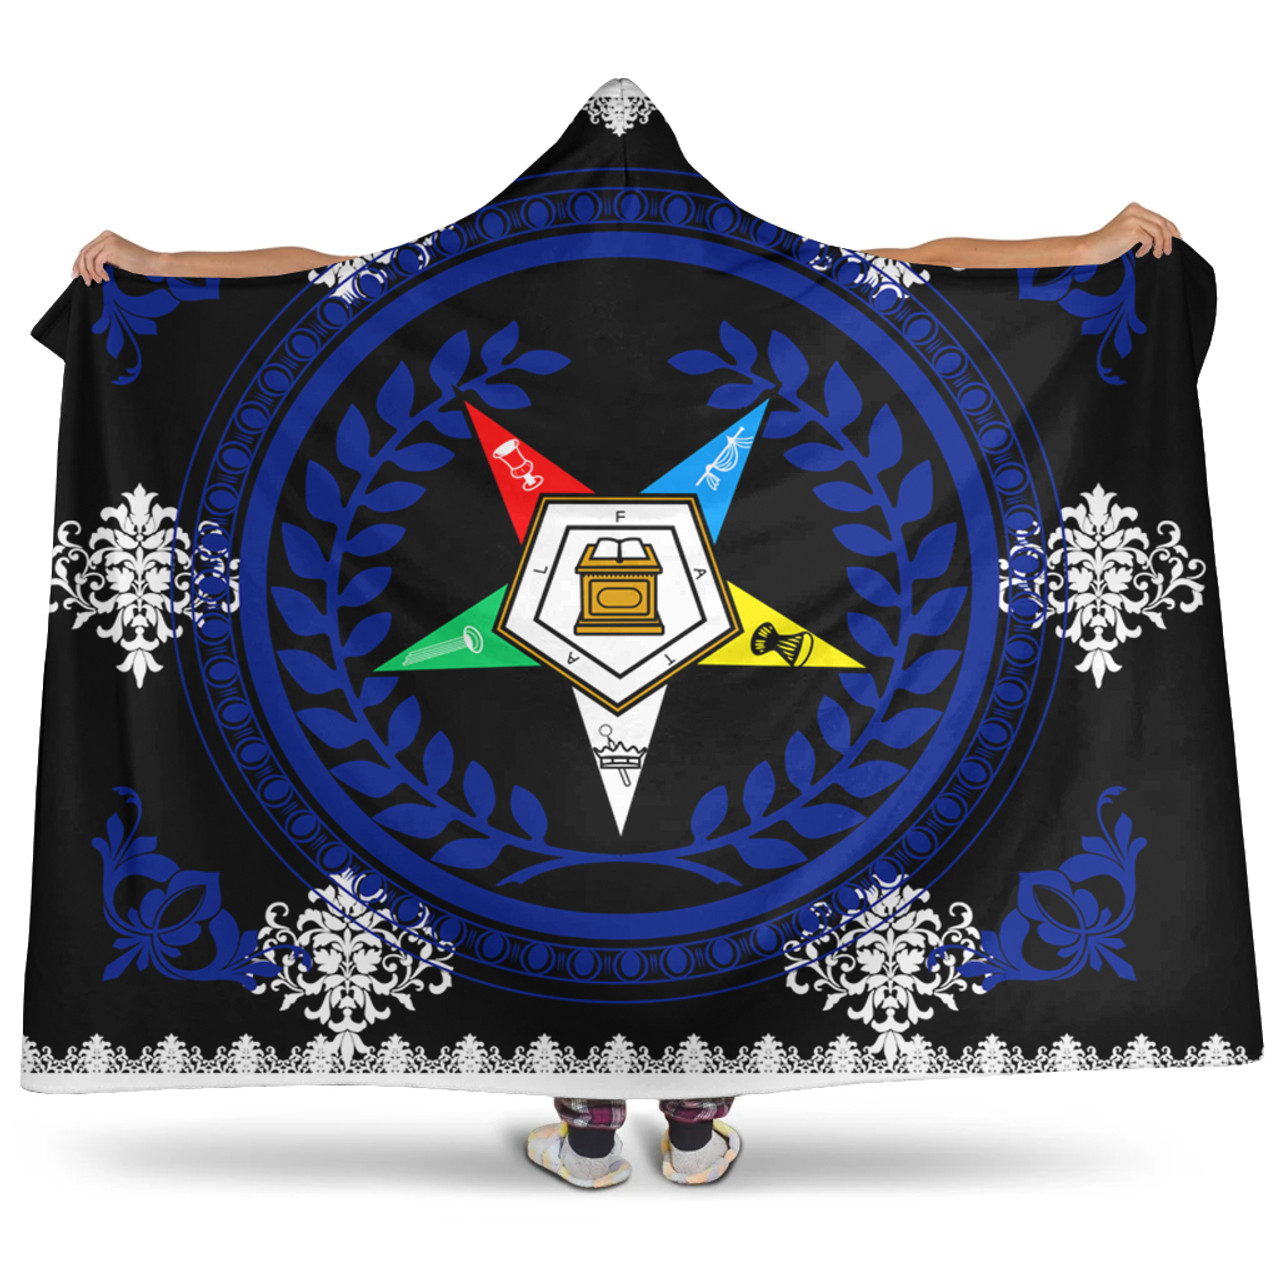 Order of the Eastern Star Hooded Blanket Floral Circle